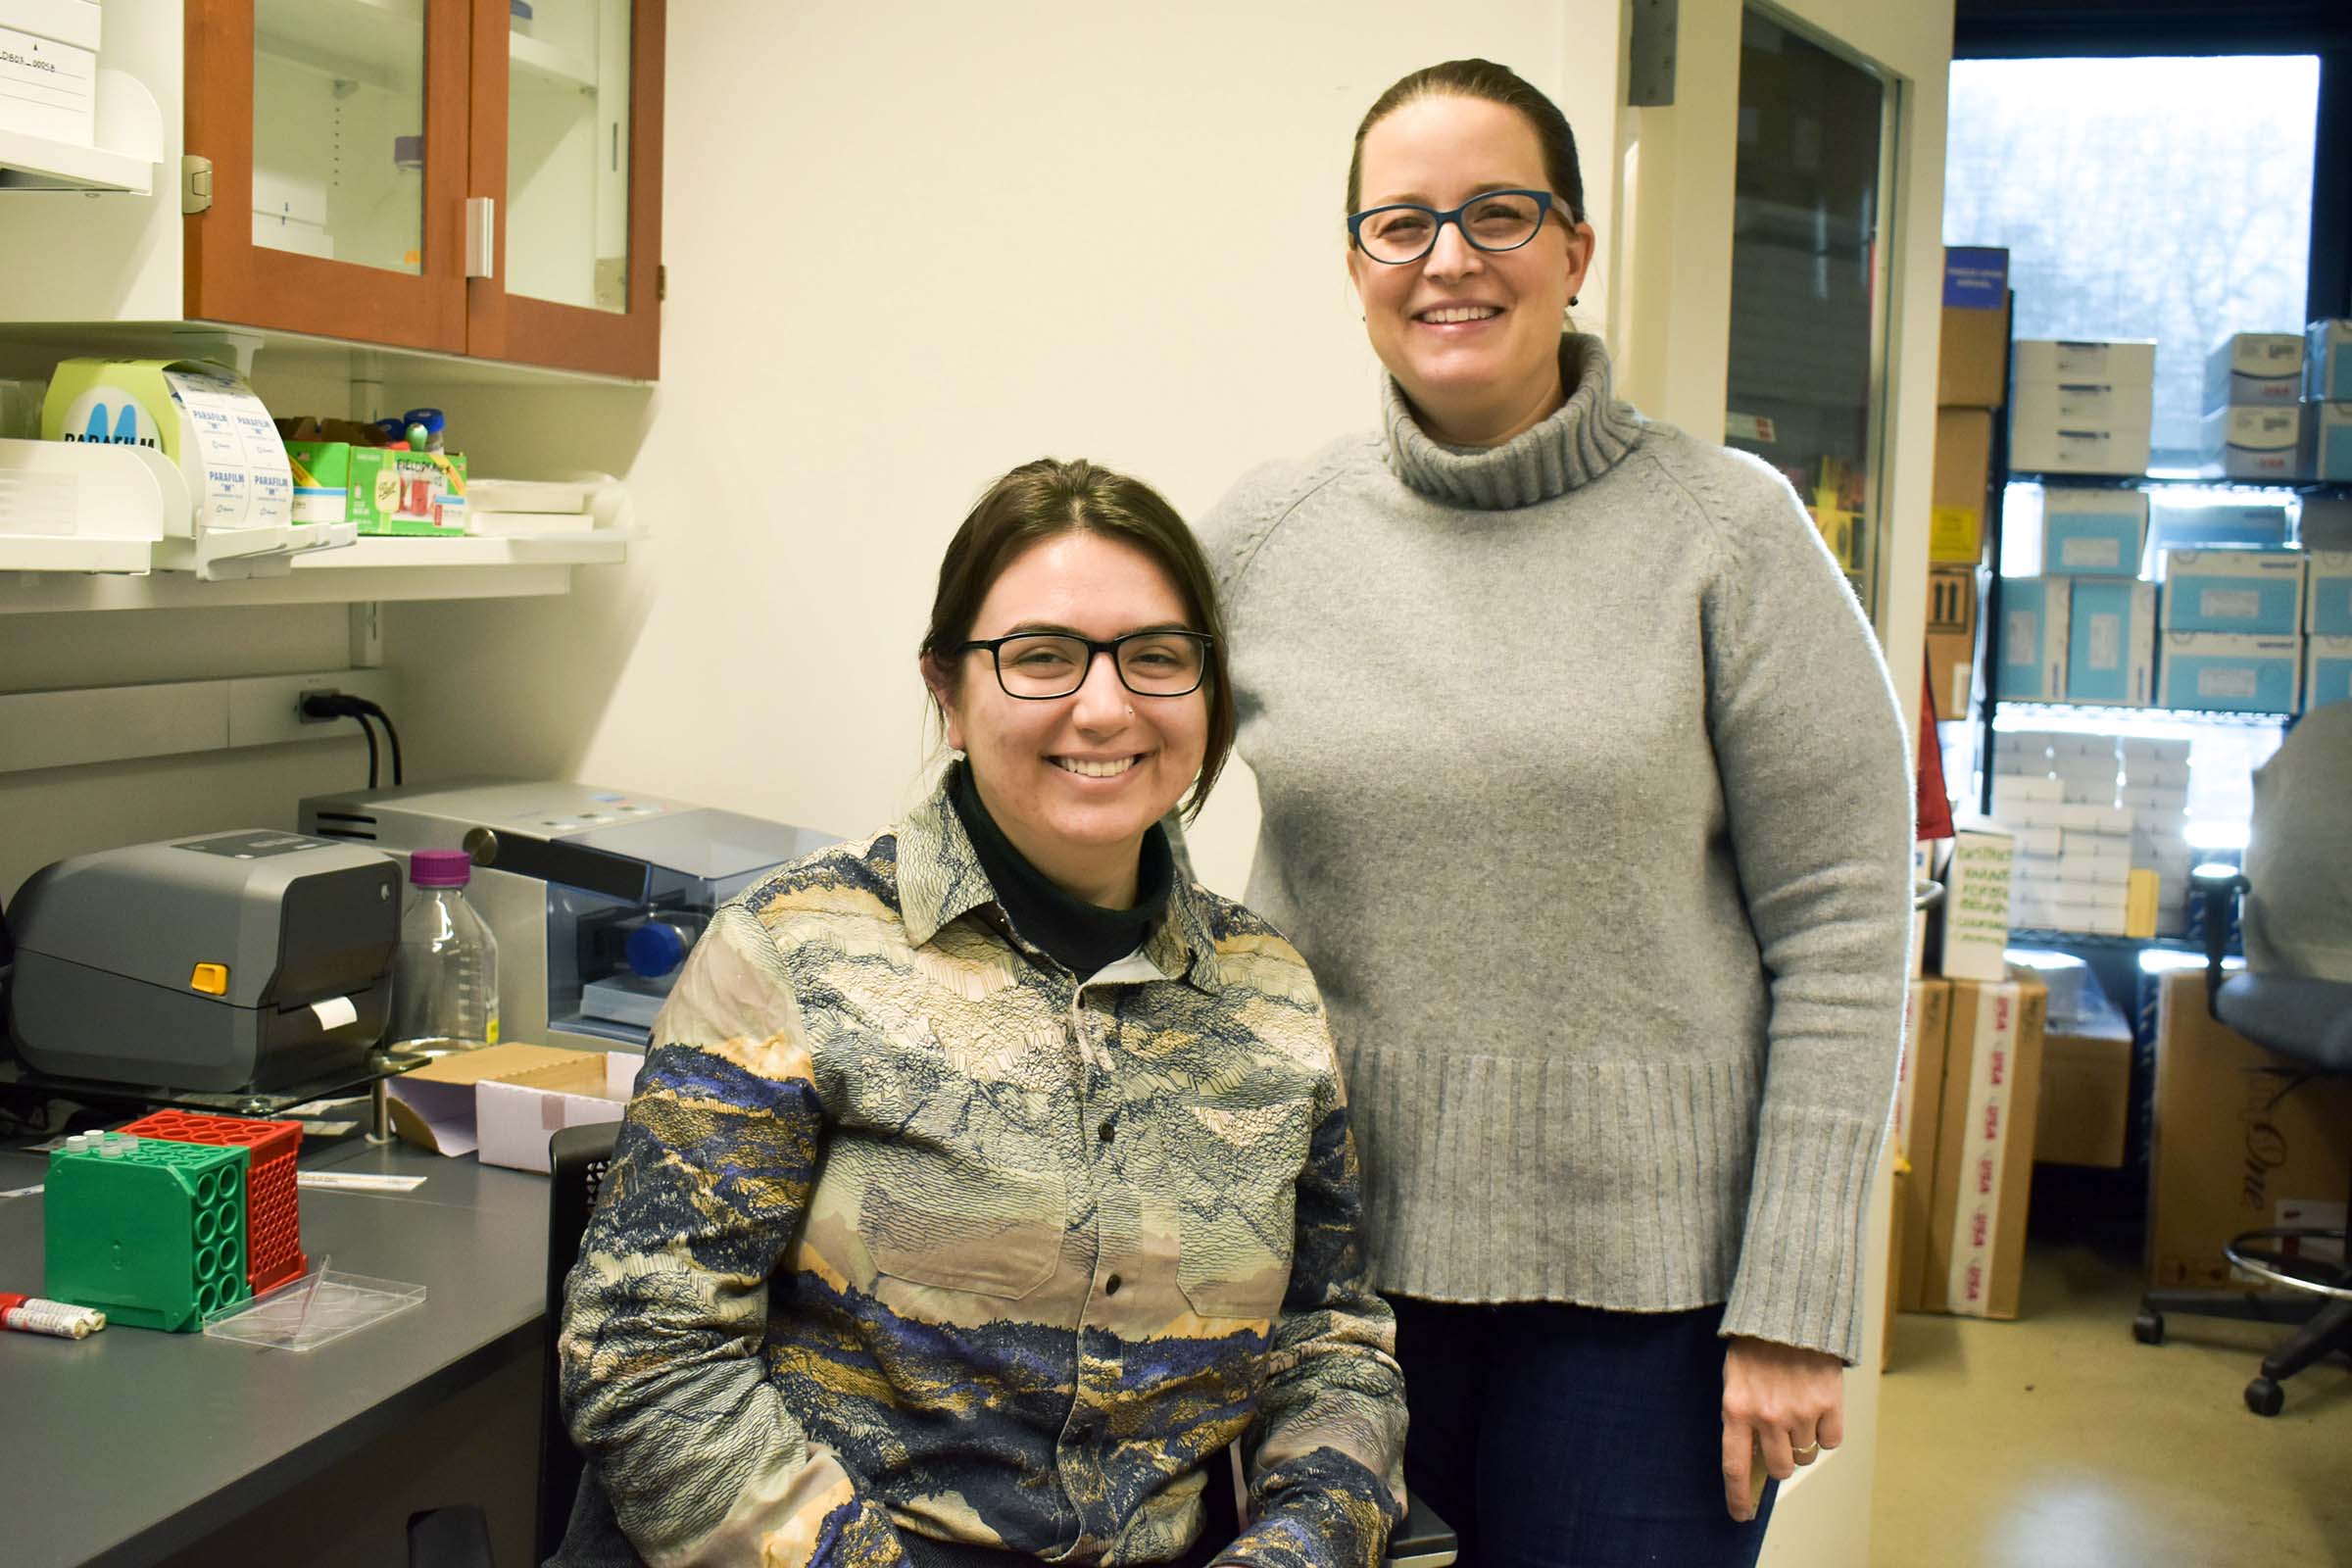 Morgan Stephens ’23 (left), sitting and wearing a printed collared shirt, and Visiting Scholar Elizabeth Thiele, standing and wearing a gray turtle neck sweater, in a research lab.